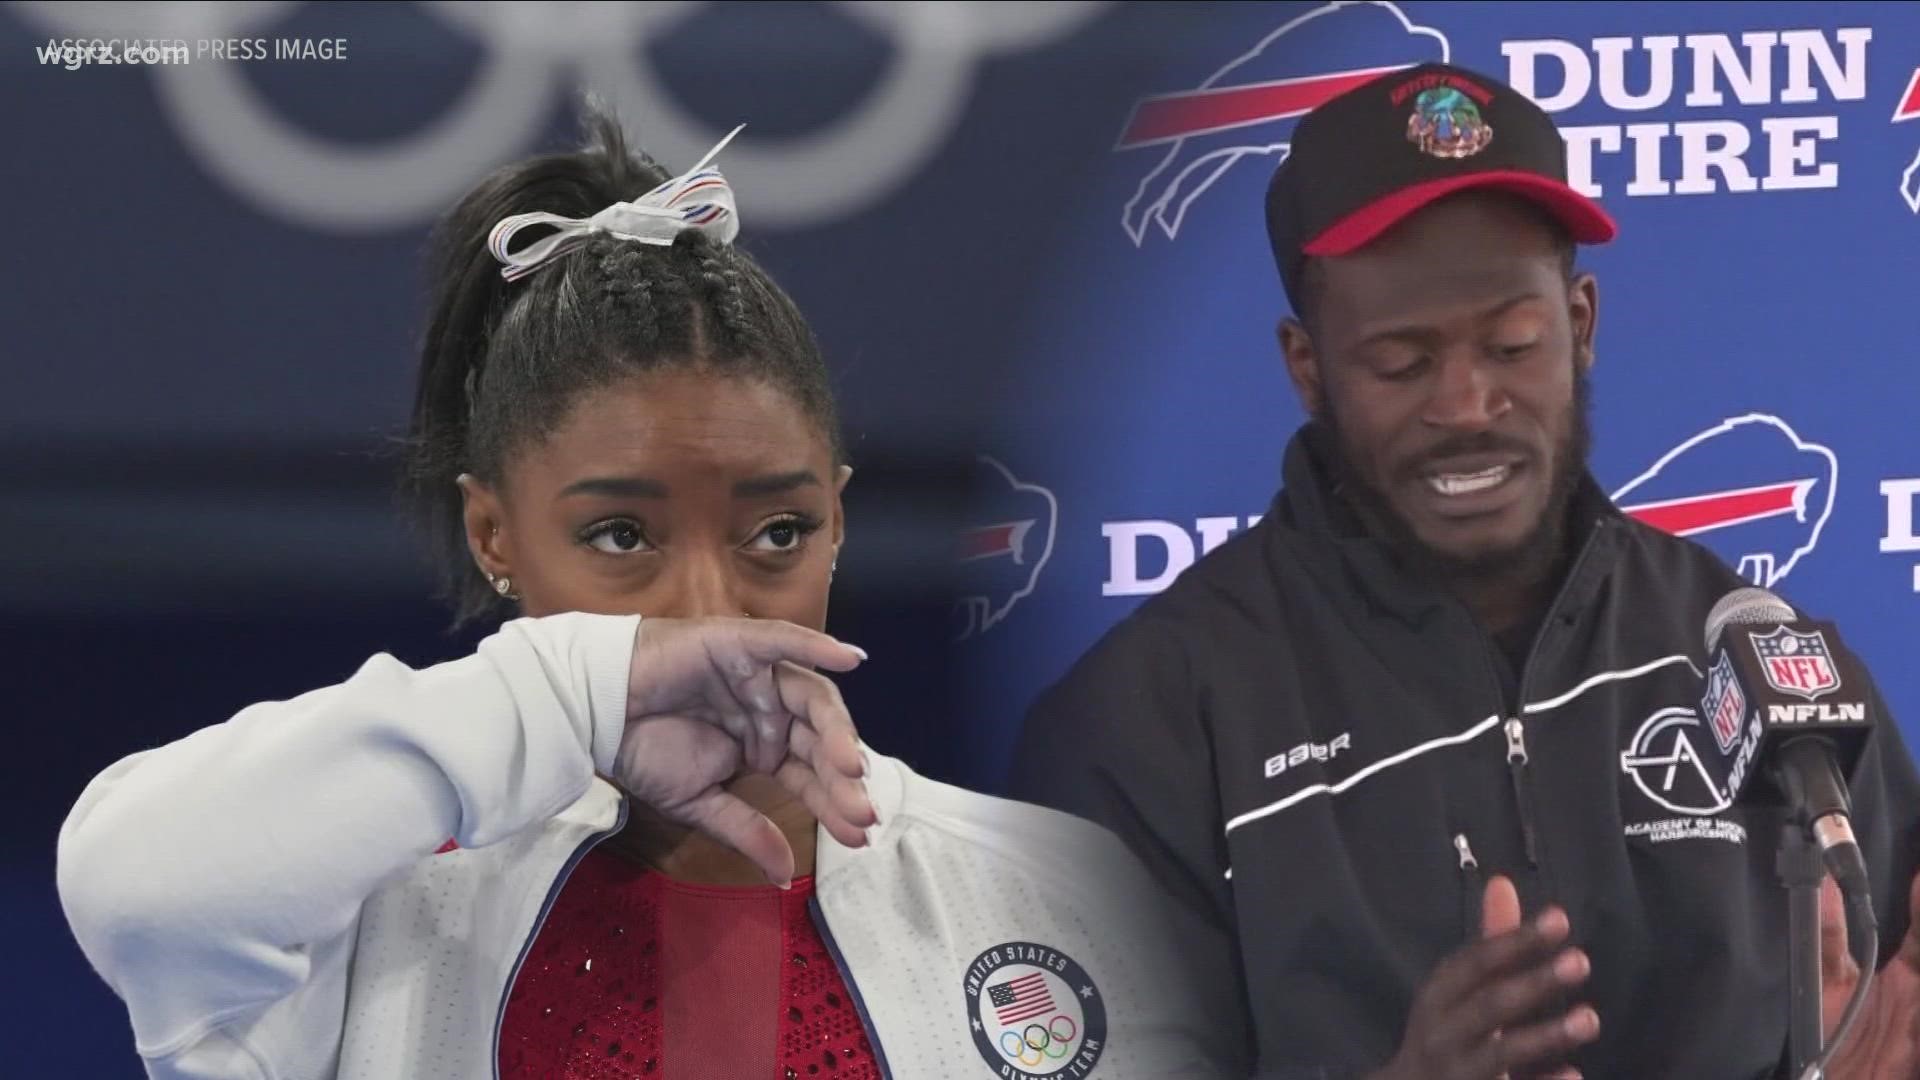 We're hearing from a lot of athletes... including here locally -- who are reflecting on Biles' decision... and the pressure that comes with the spotlight on sports.